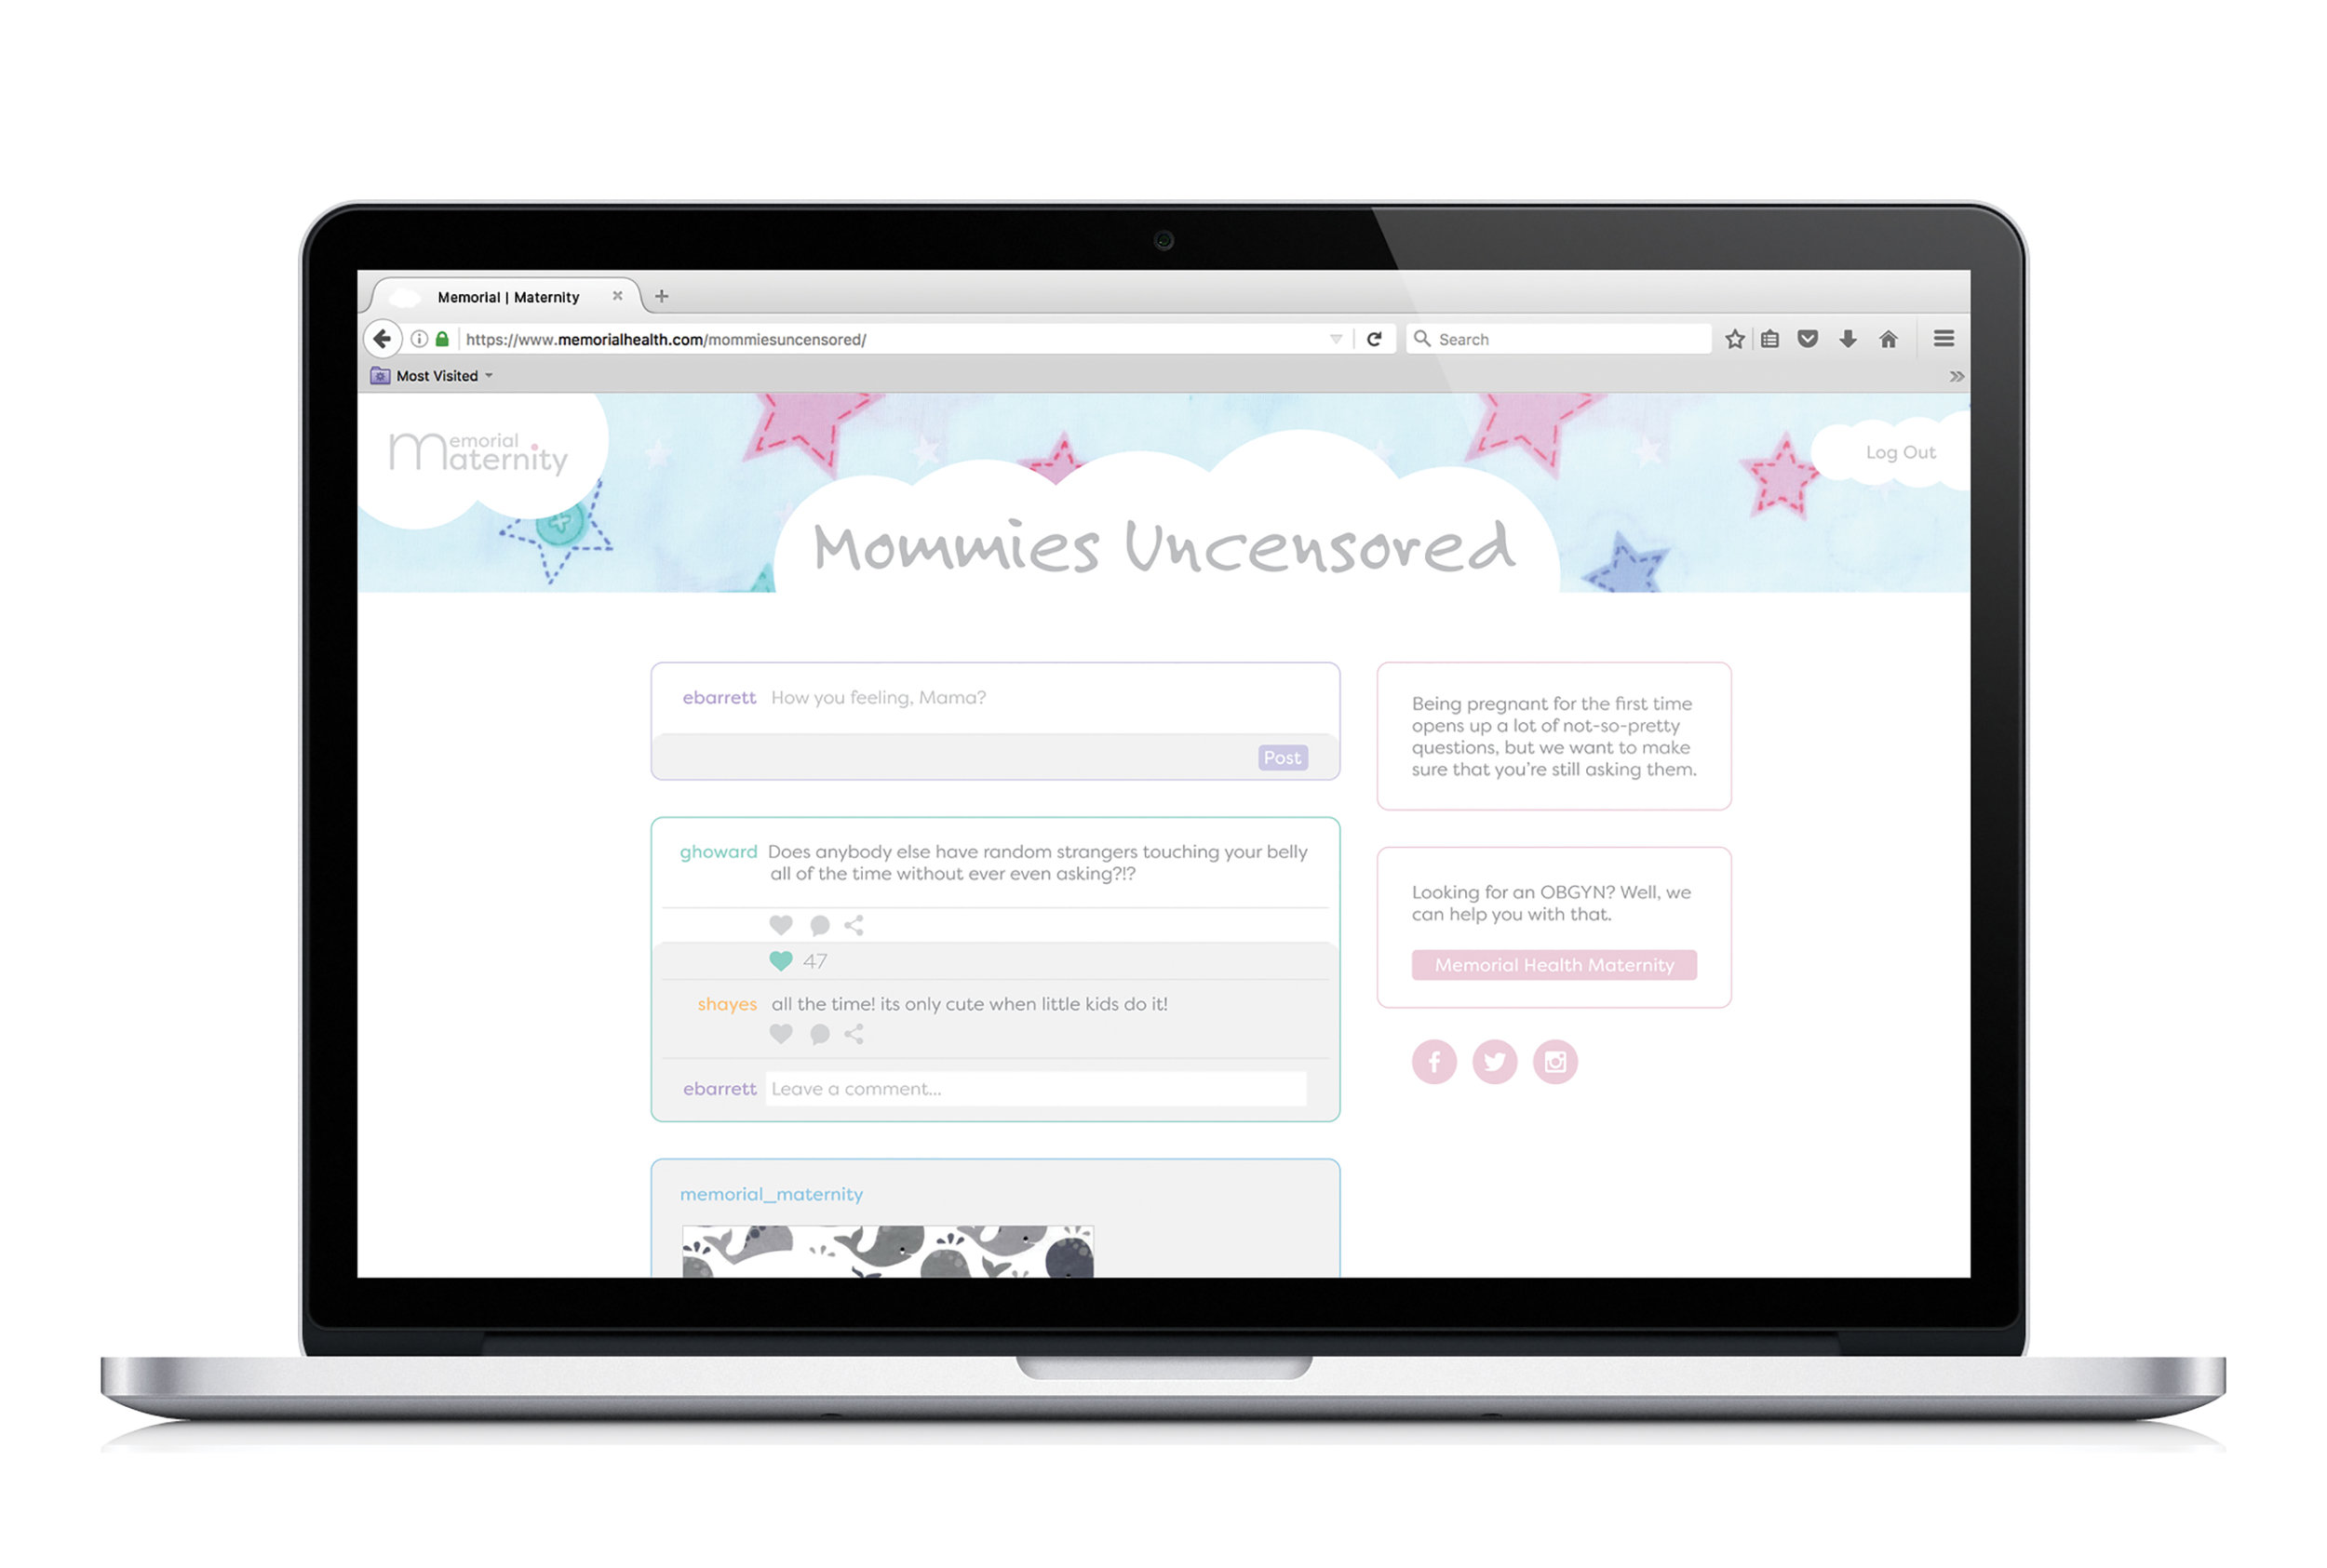   Microsite : Created as an open forum for the first time mommies-to-be to talk to each other in a safe place, as well as have direct access to professional feedback and the resources to get plugged in to Memorial Maternity.&nbsp; 